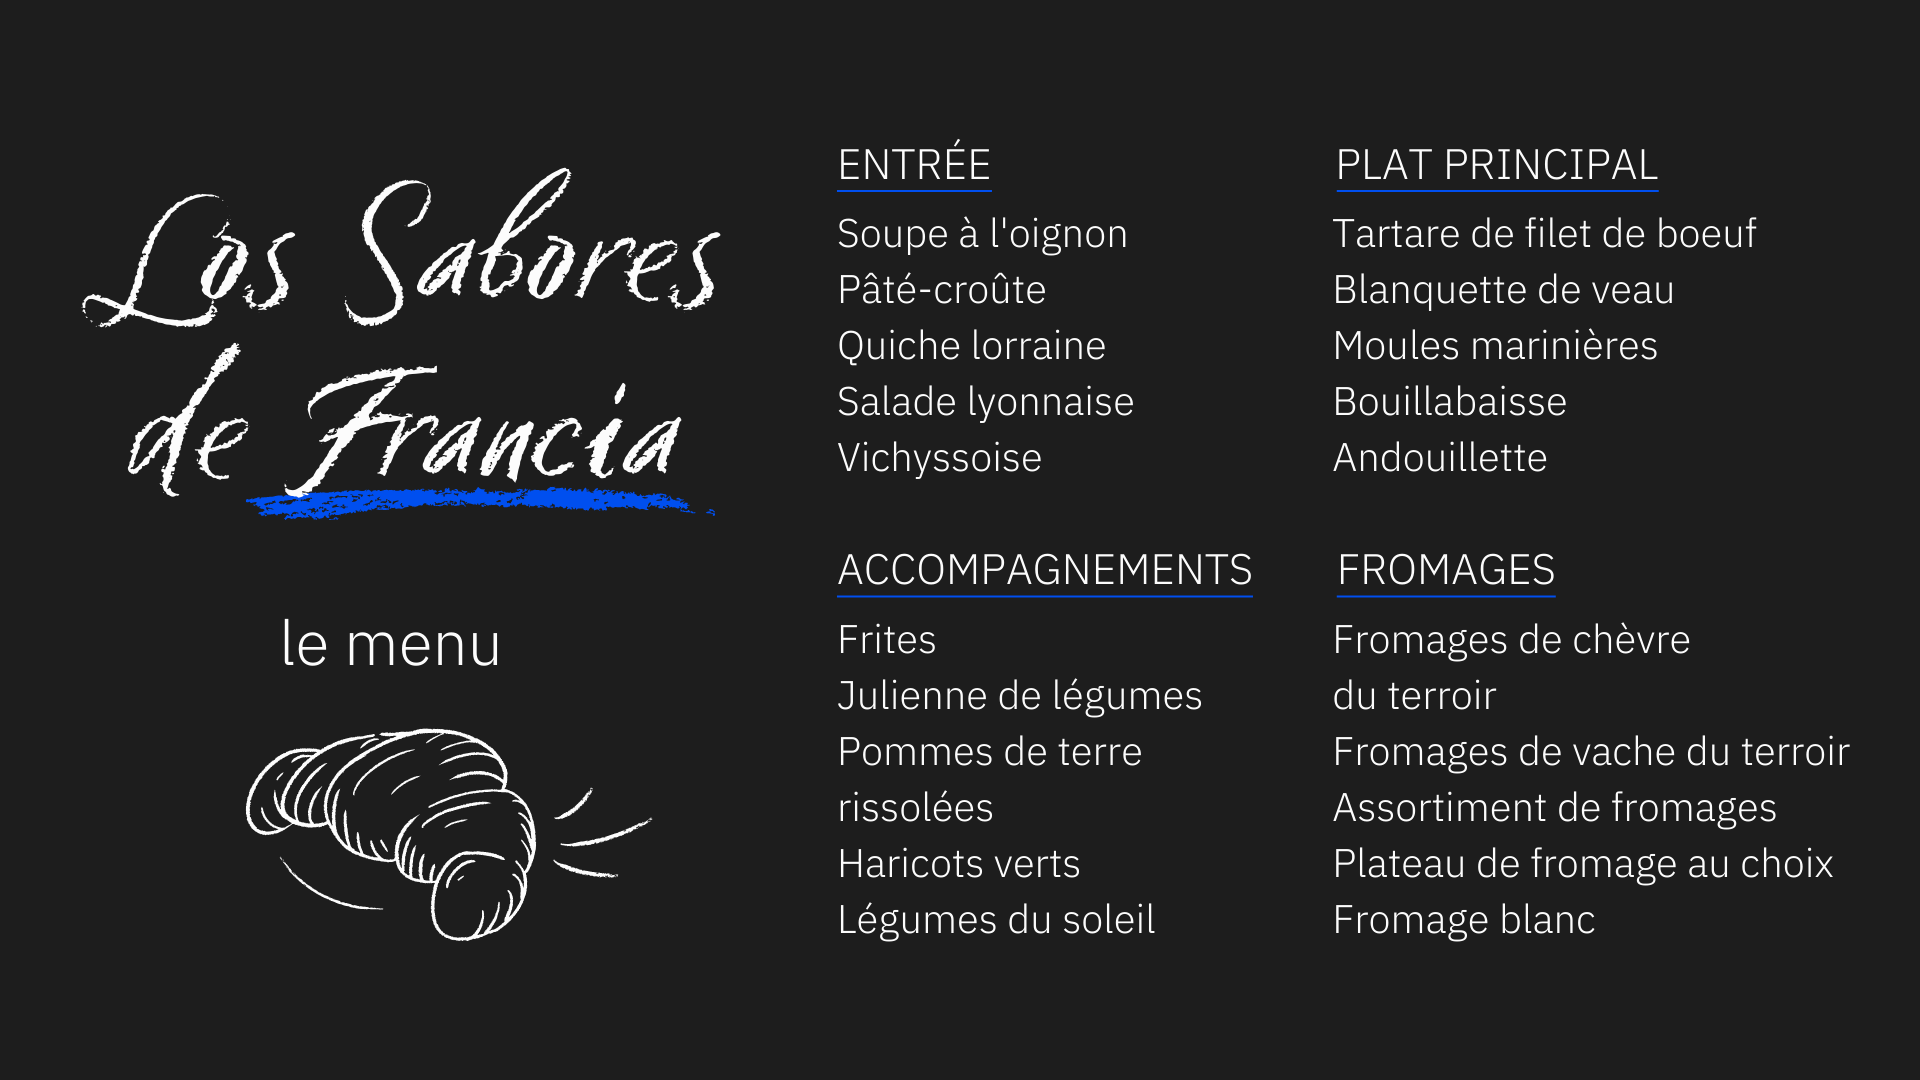 How to order food in French with our restaurant menu in French.